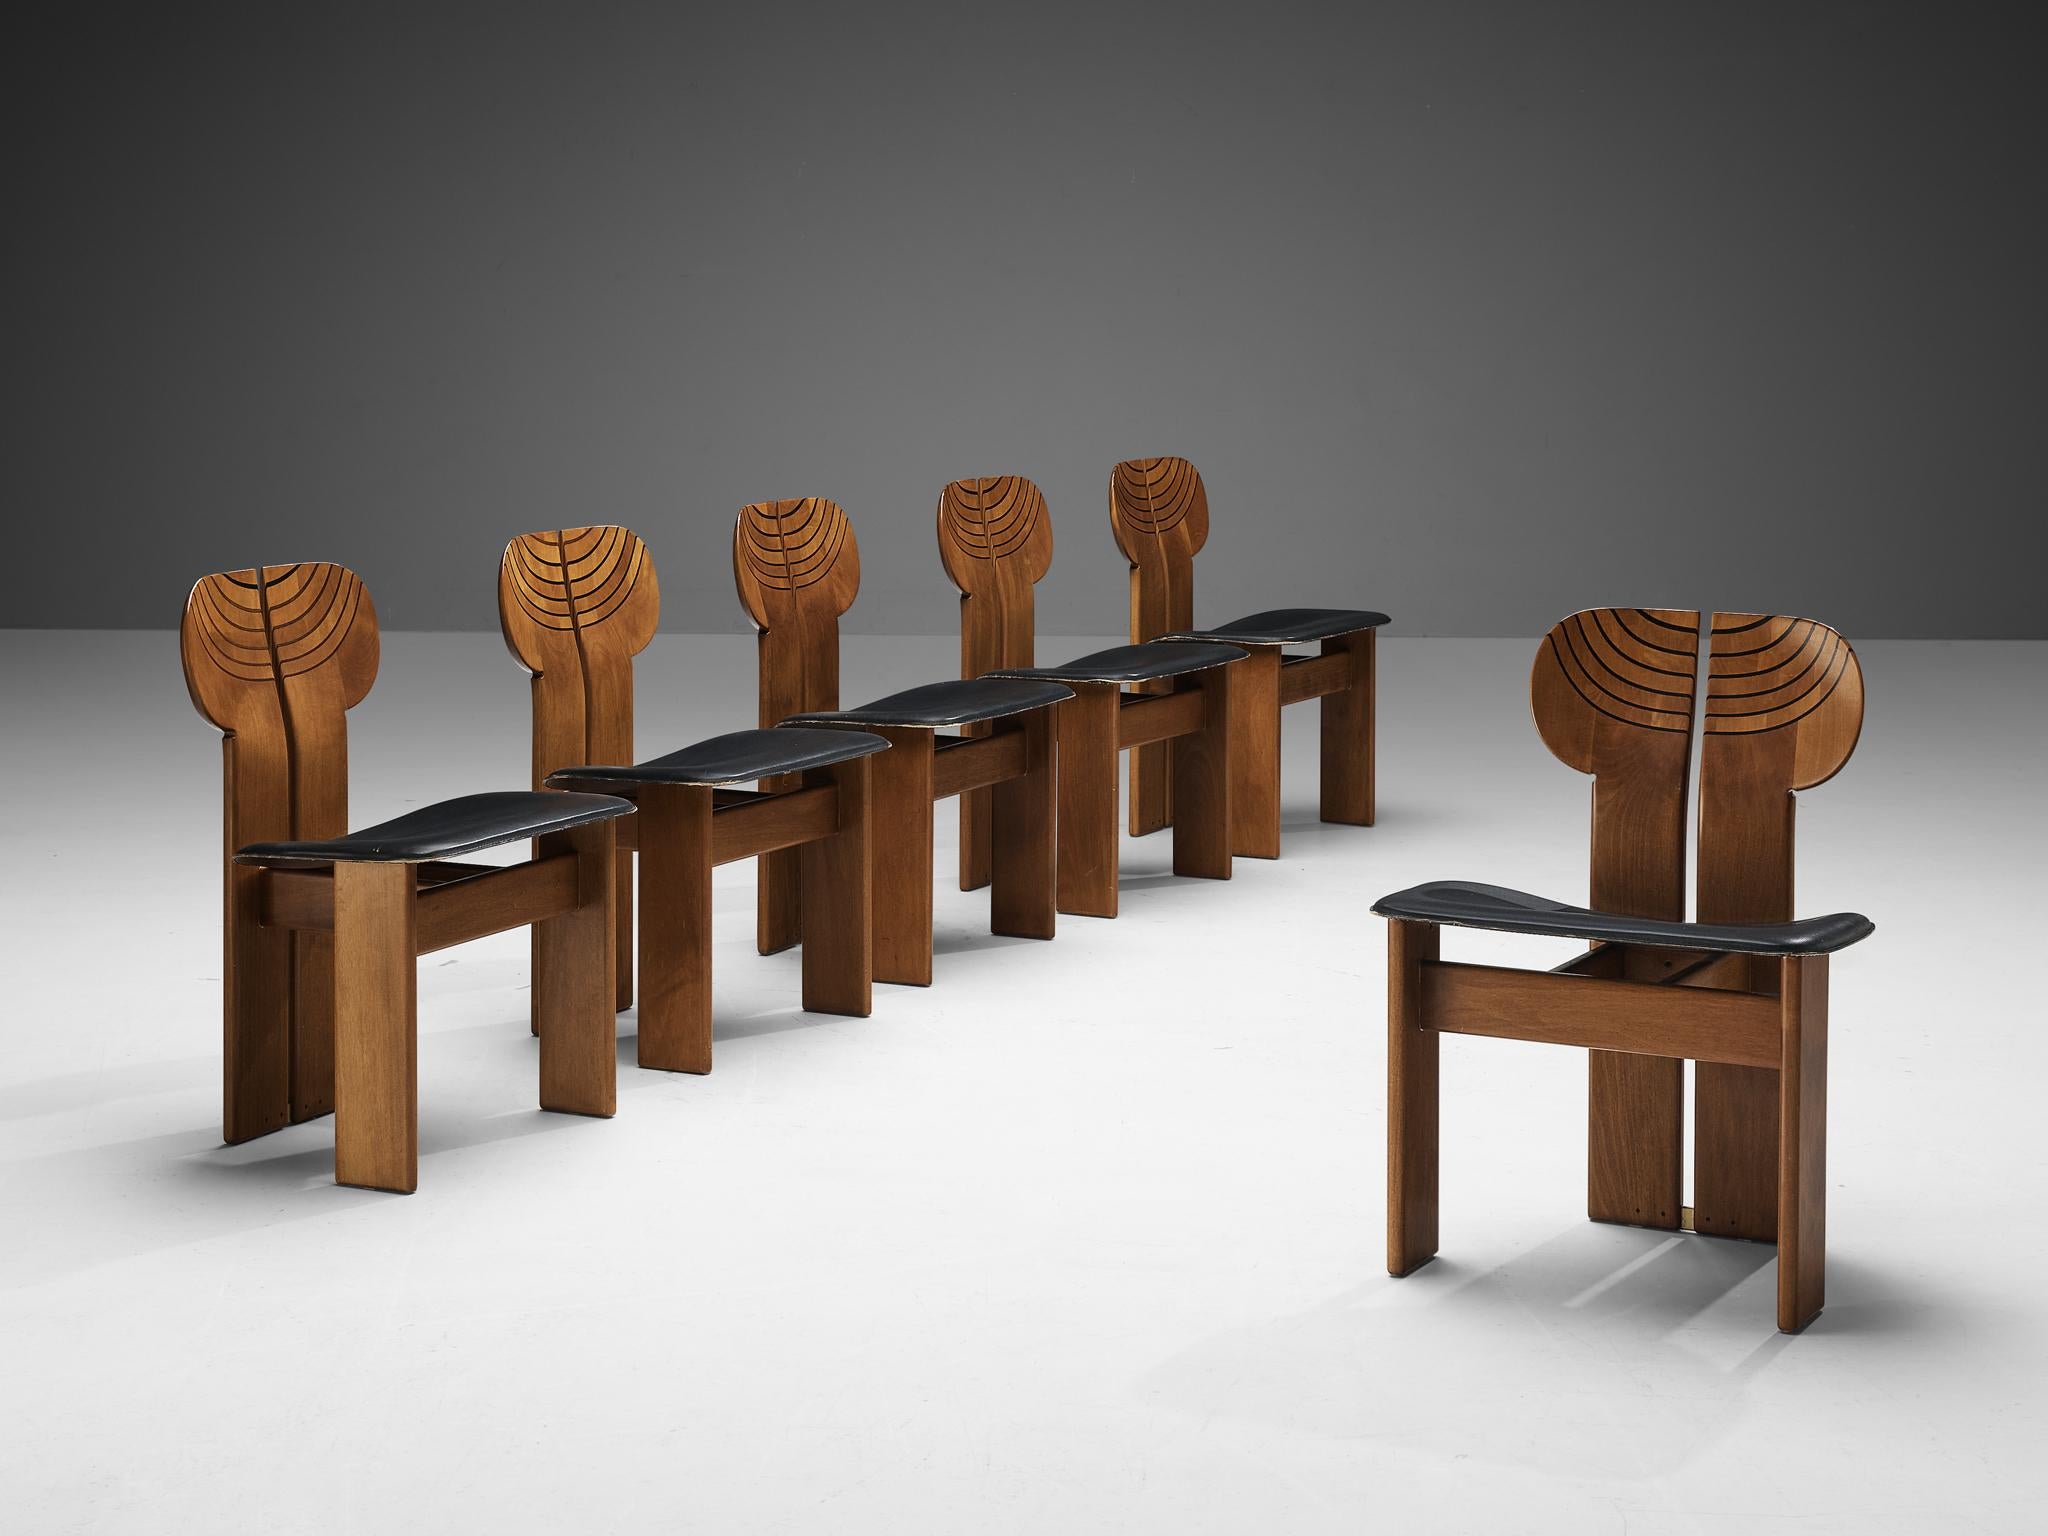 Afra & Tobia Scarpa for Maxalto, set of six dining chairs, model 'Africa', leather, walnut, ebony, brass, Italy, 1975

Sculptural set of of six 'Africa' dining chairs designed by Afra & Tobia Scarpa. This model is part of the Artona collection by